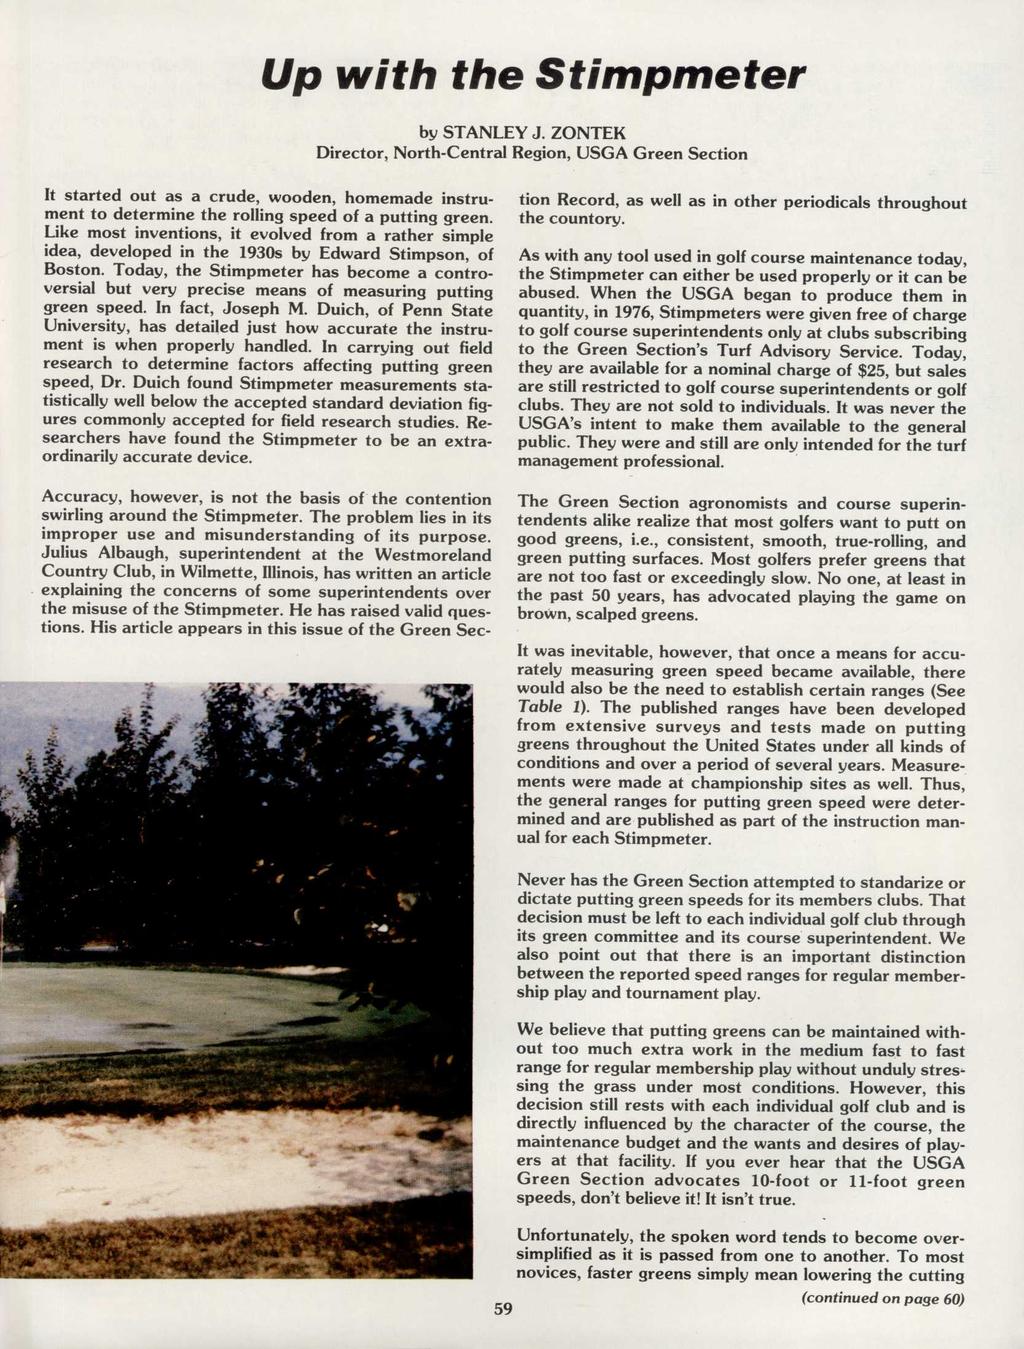 Up with the Stimpmeter by STANLEY J. ZONTEK Director, North-Central Region, USGA Green Section It started out as a crude, wooden, homemade instrument to determine the rolling speed of a putting green.